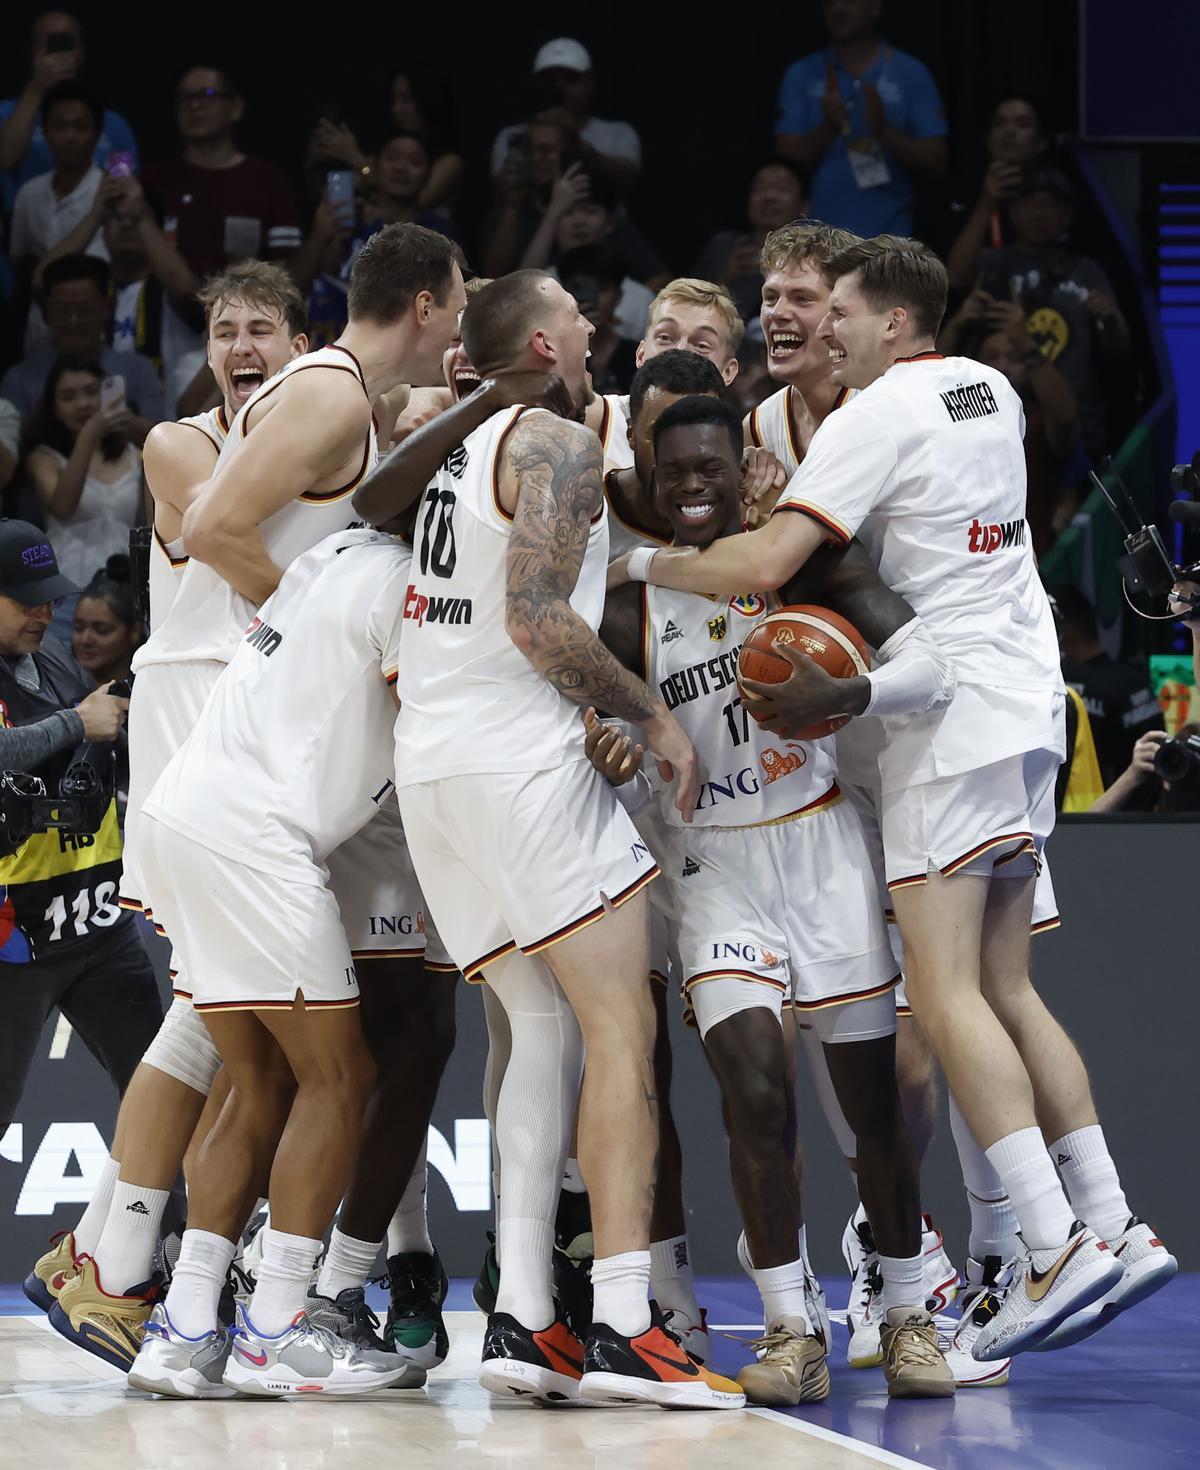 Manila (Philippines), 10/09/2023.- Dennis Schroder (C) of Germany celebrates with teammates after winning the FIBA Basketball World Cup 2023 final match between Serbia and Germany at the Mall of Asia in Manila, Philippines, 10 September 2023. (Baloncesto, Alemania, Filipinas) EFE/EPA/ROLEX DELA PENA